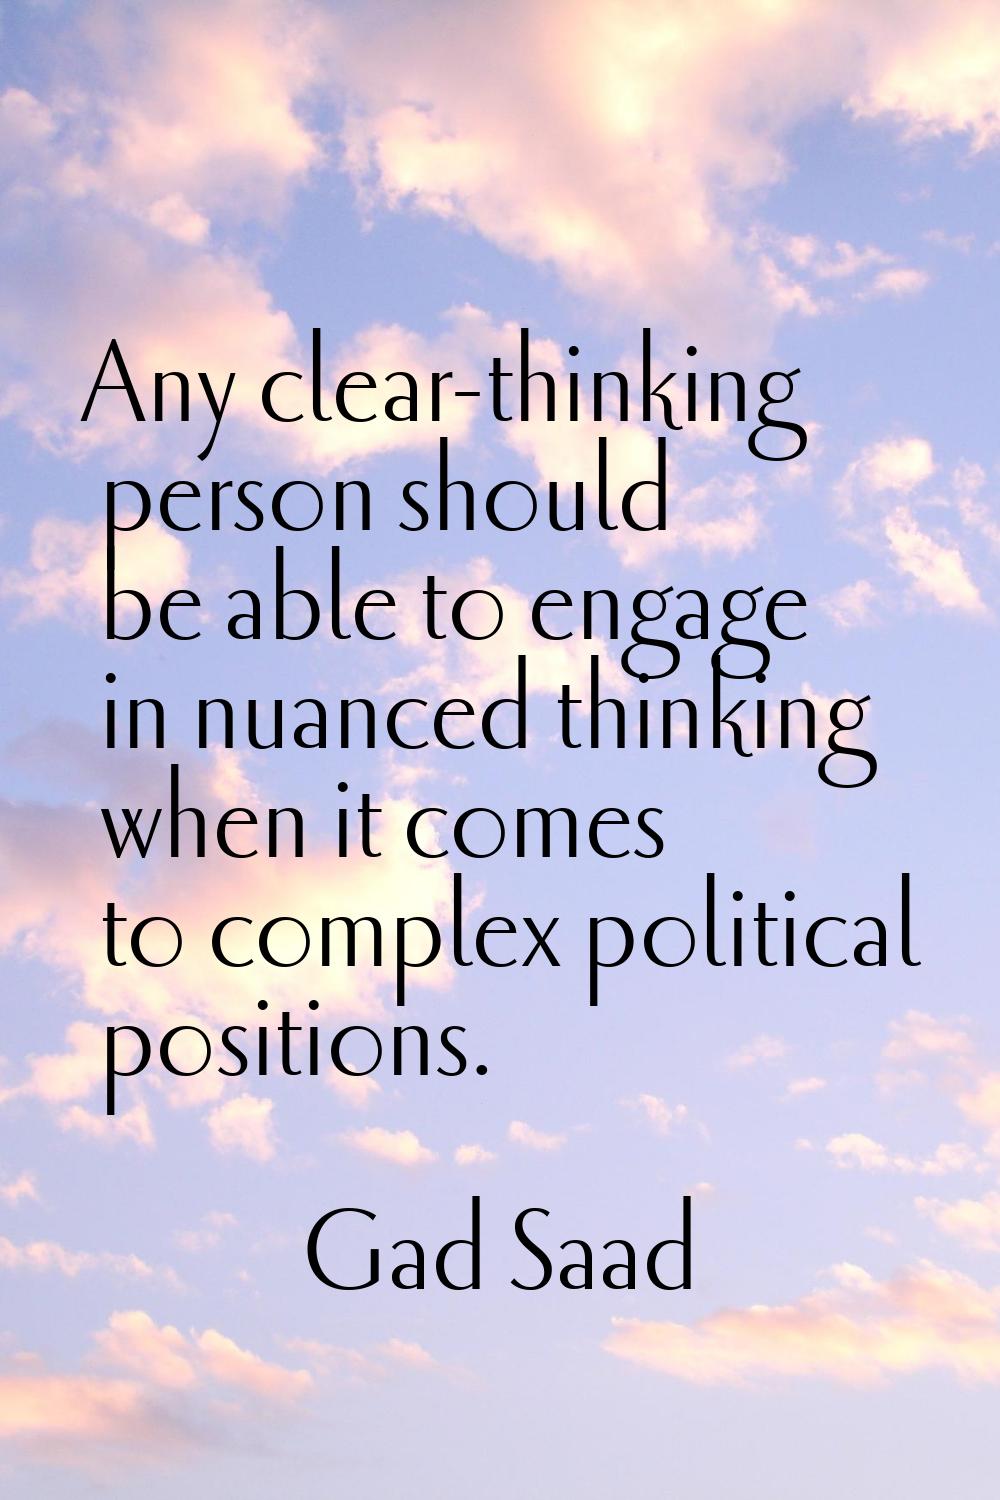 Any clear-thinking person should be able to engage in nuanced thinking when it comes to complex pol